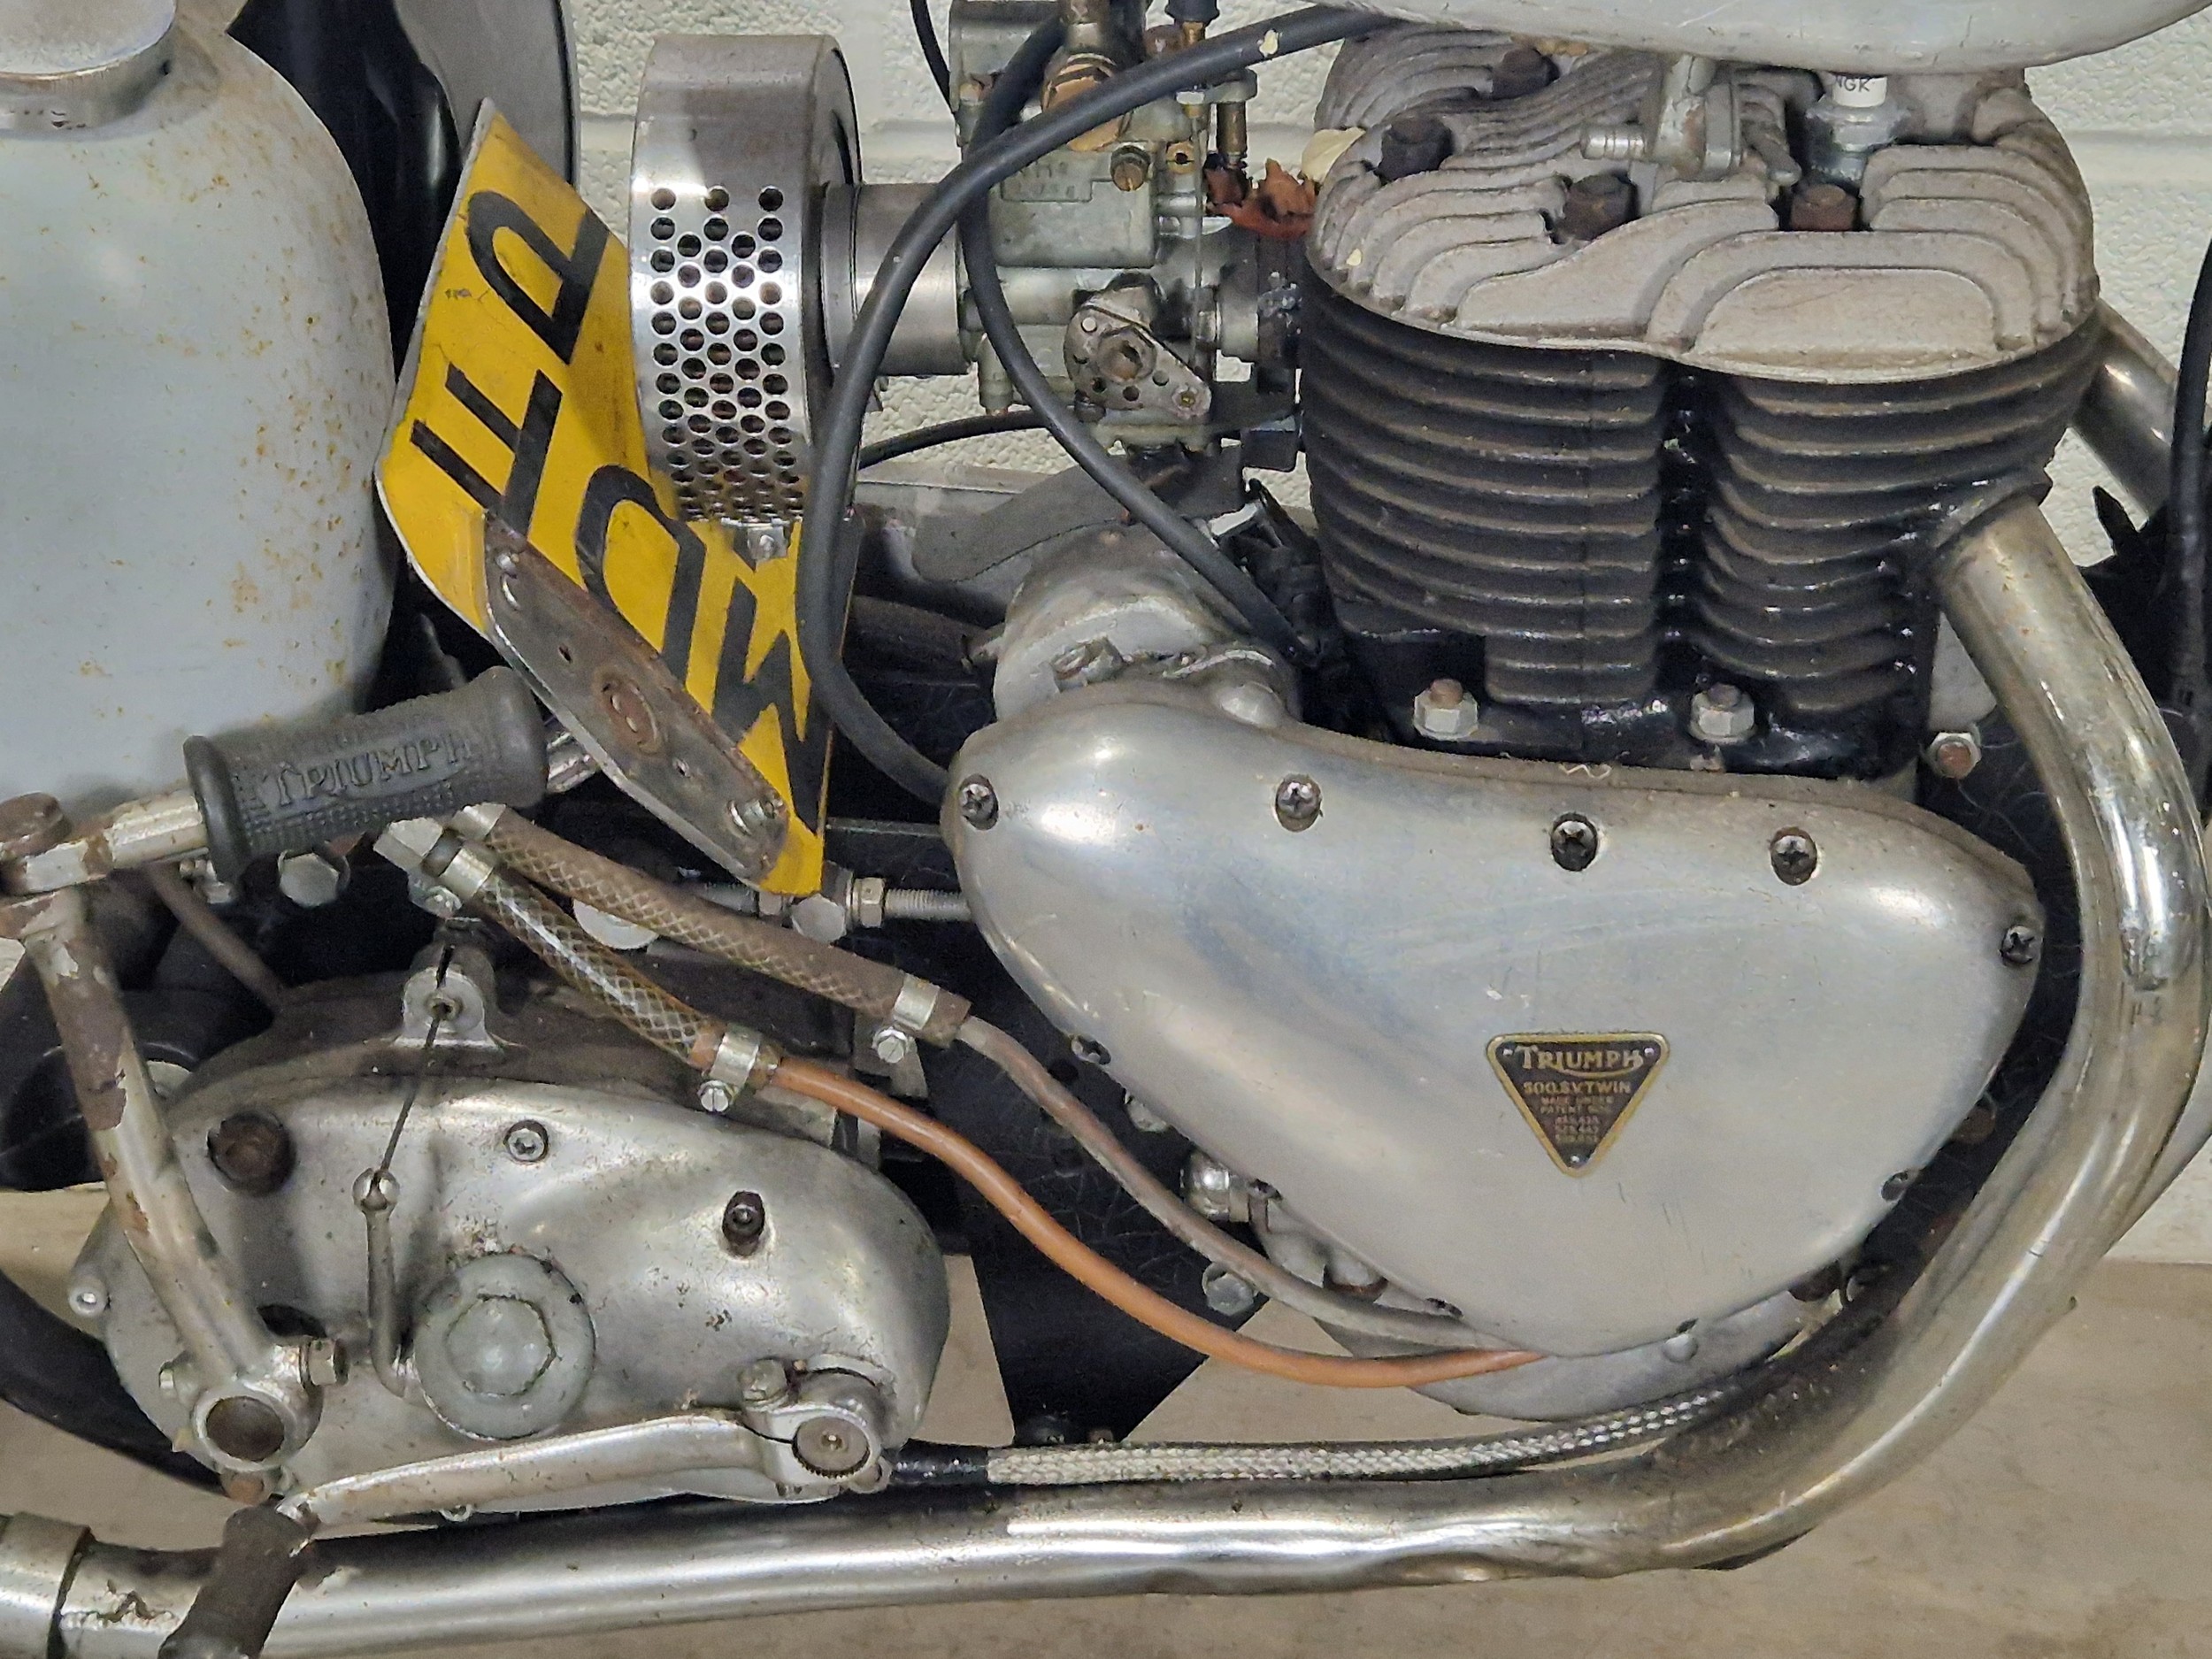 Triumph TRW motorcycle project. 1964. 500cc. Engine No. TRW26402X Believed to have been a factory - Image 4 of 7